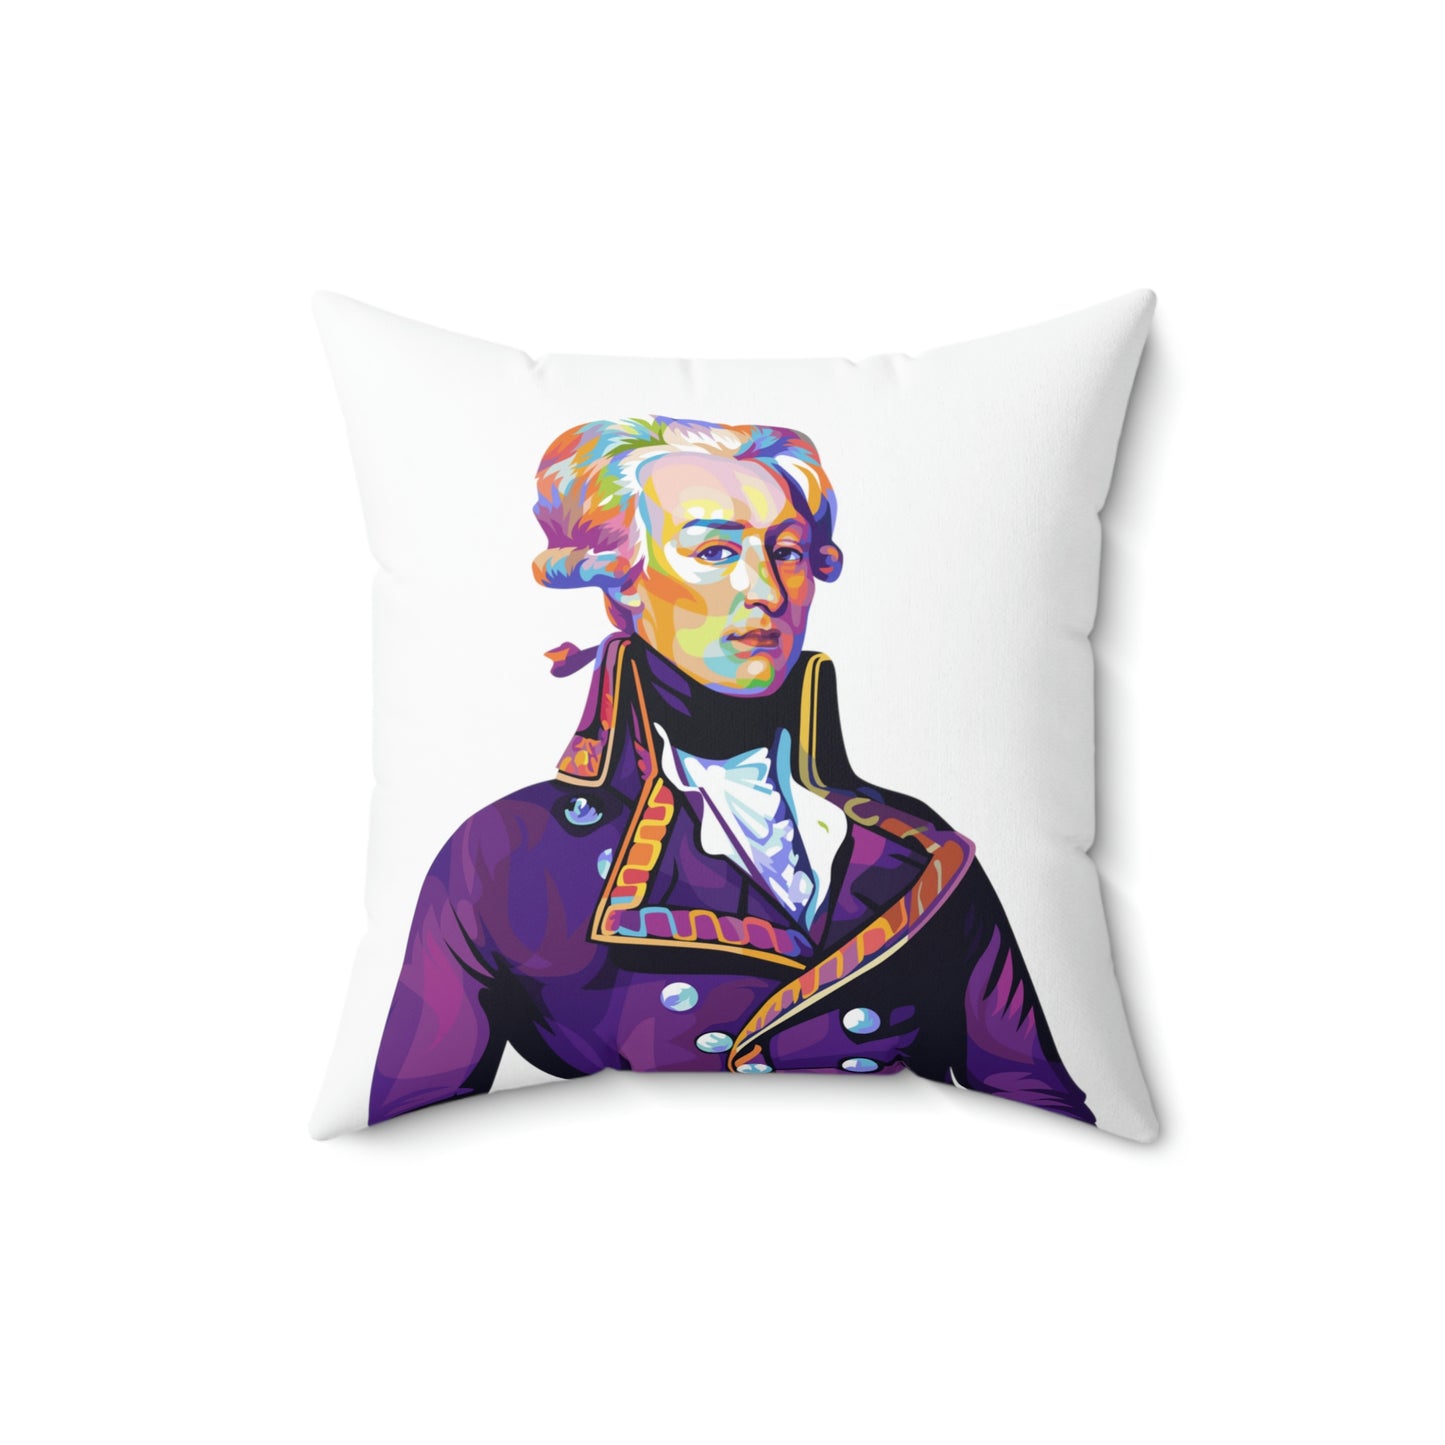 Lafayette Pillow with image of the Marquis de Lafayette